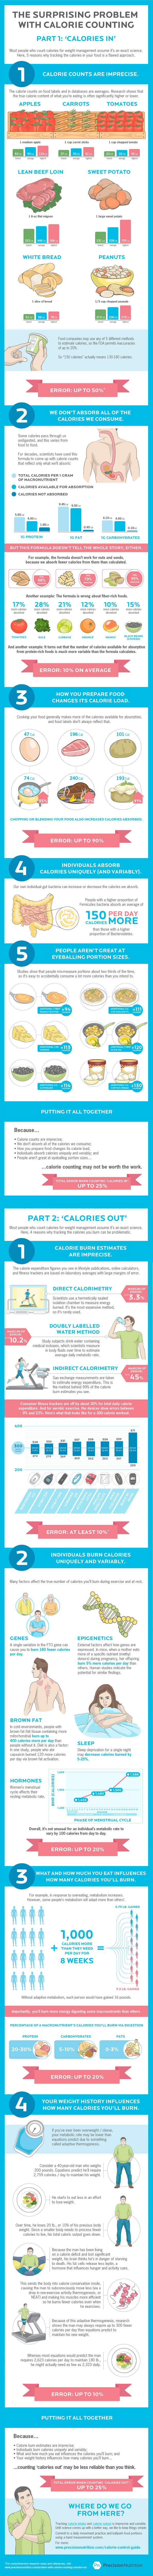 Surprising Problem with Calorie Counting Infographic